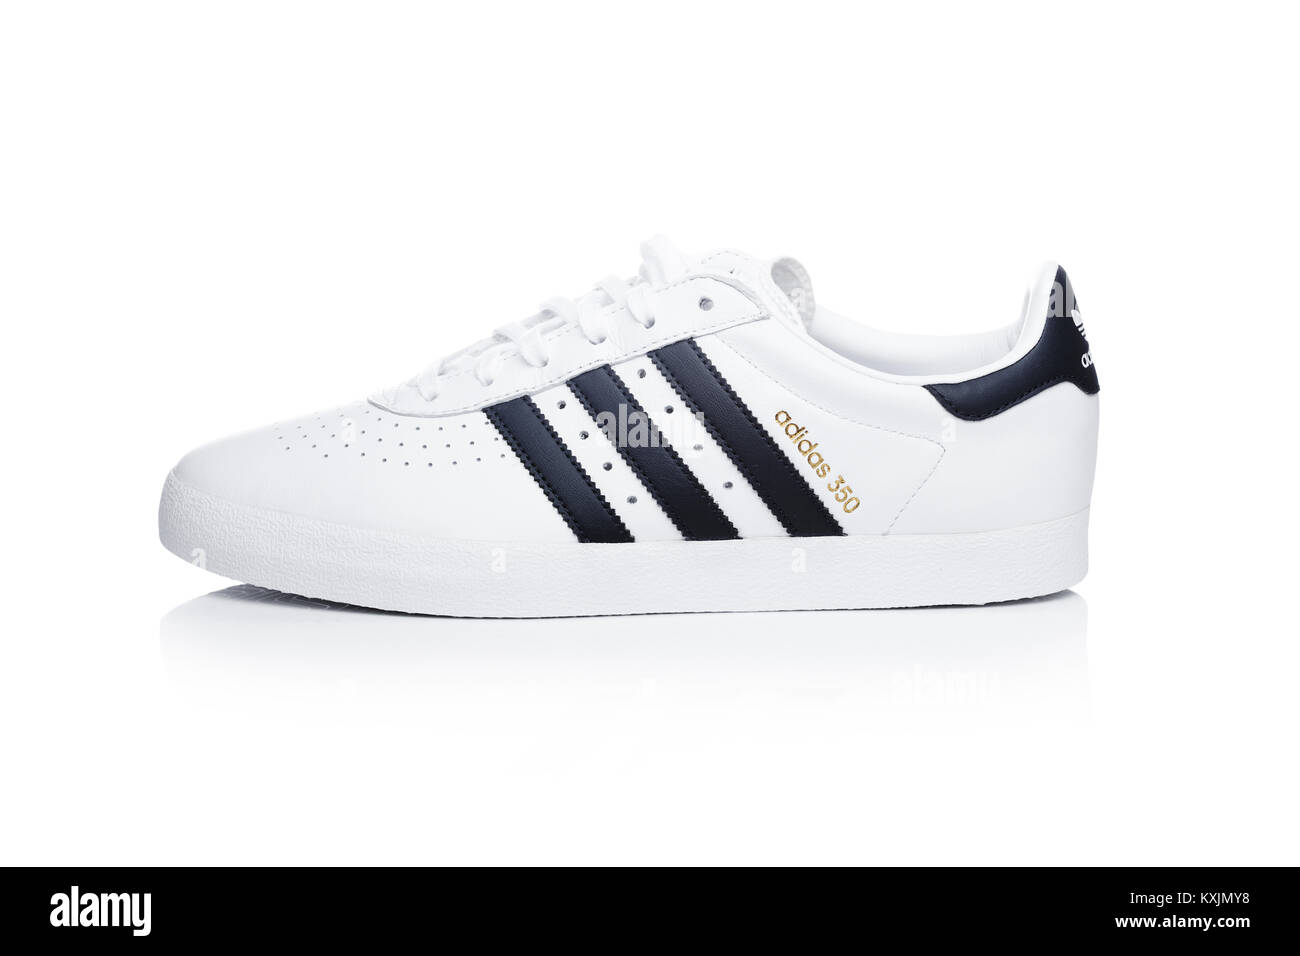 LONDON, UK - JANUARY 02, 2018: Adidas Originals shoes on white background.  German multinational corporation that designs and manufactures sports shoes  Stock Photo - Alamy